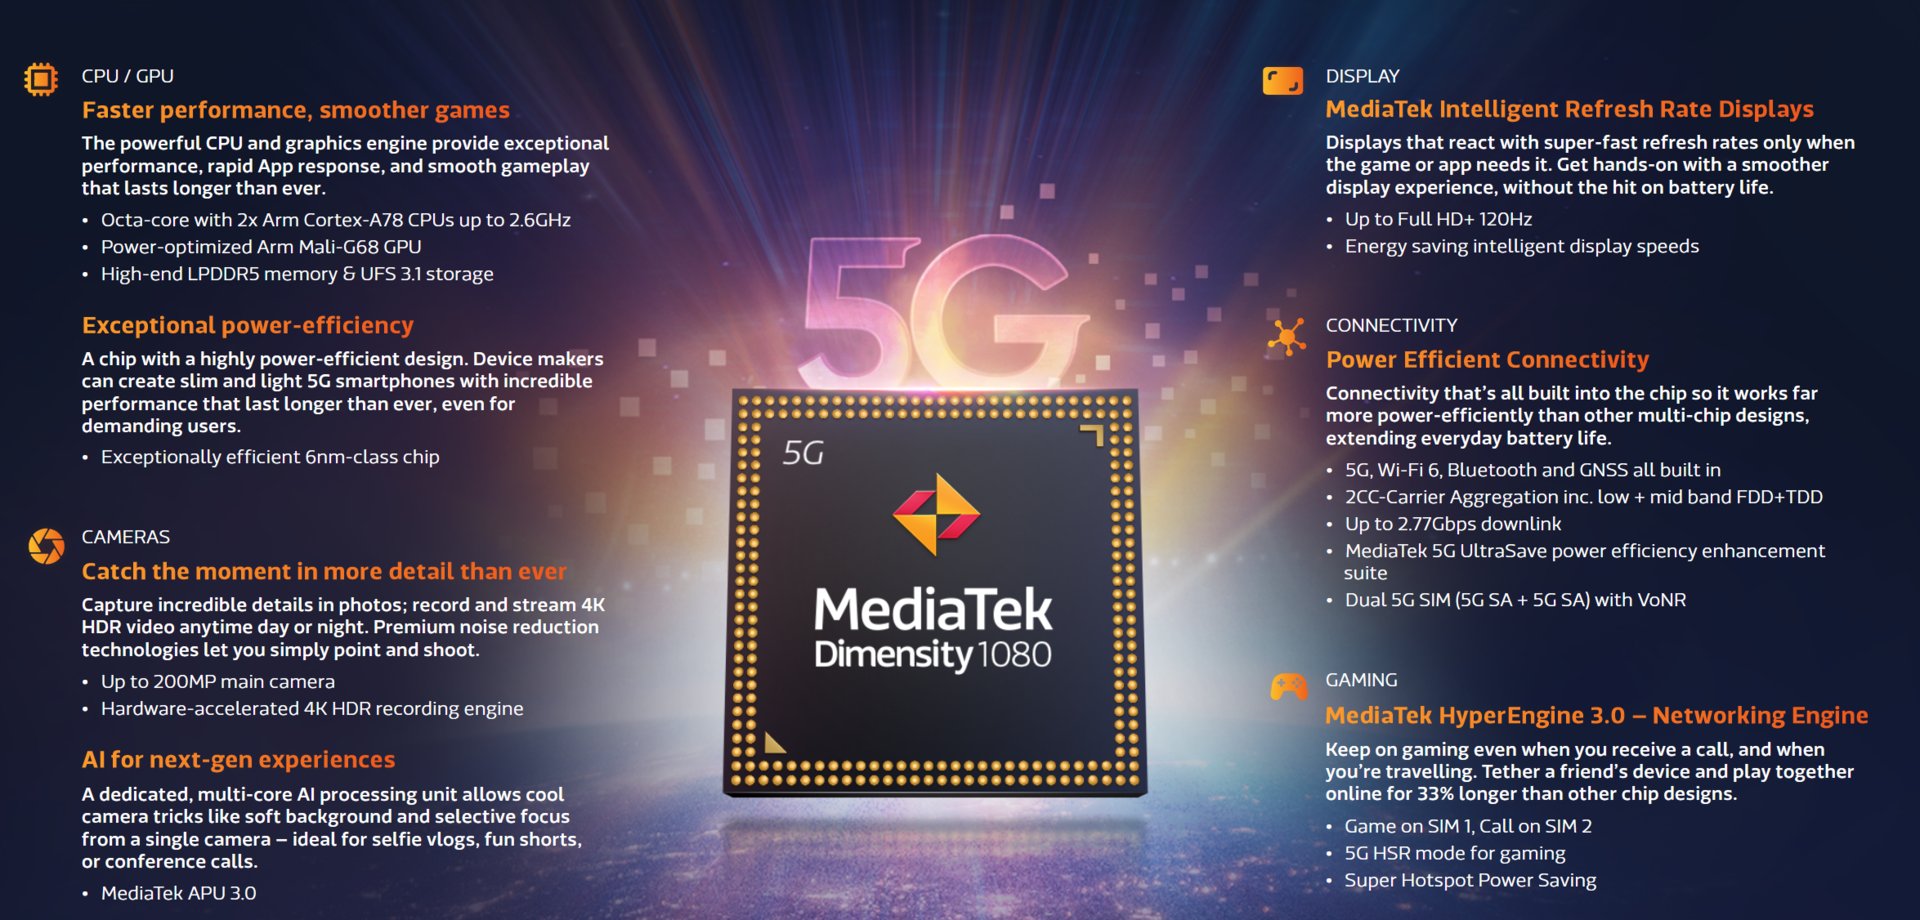 Dimensity 1080 with updated CPU, improved ISP, and 5G connection is unveiled by MediaTek